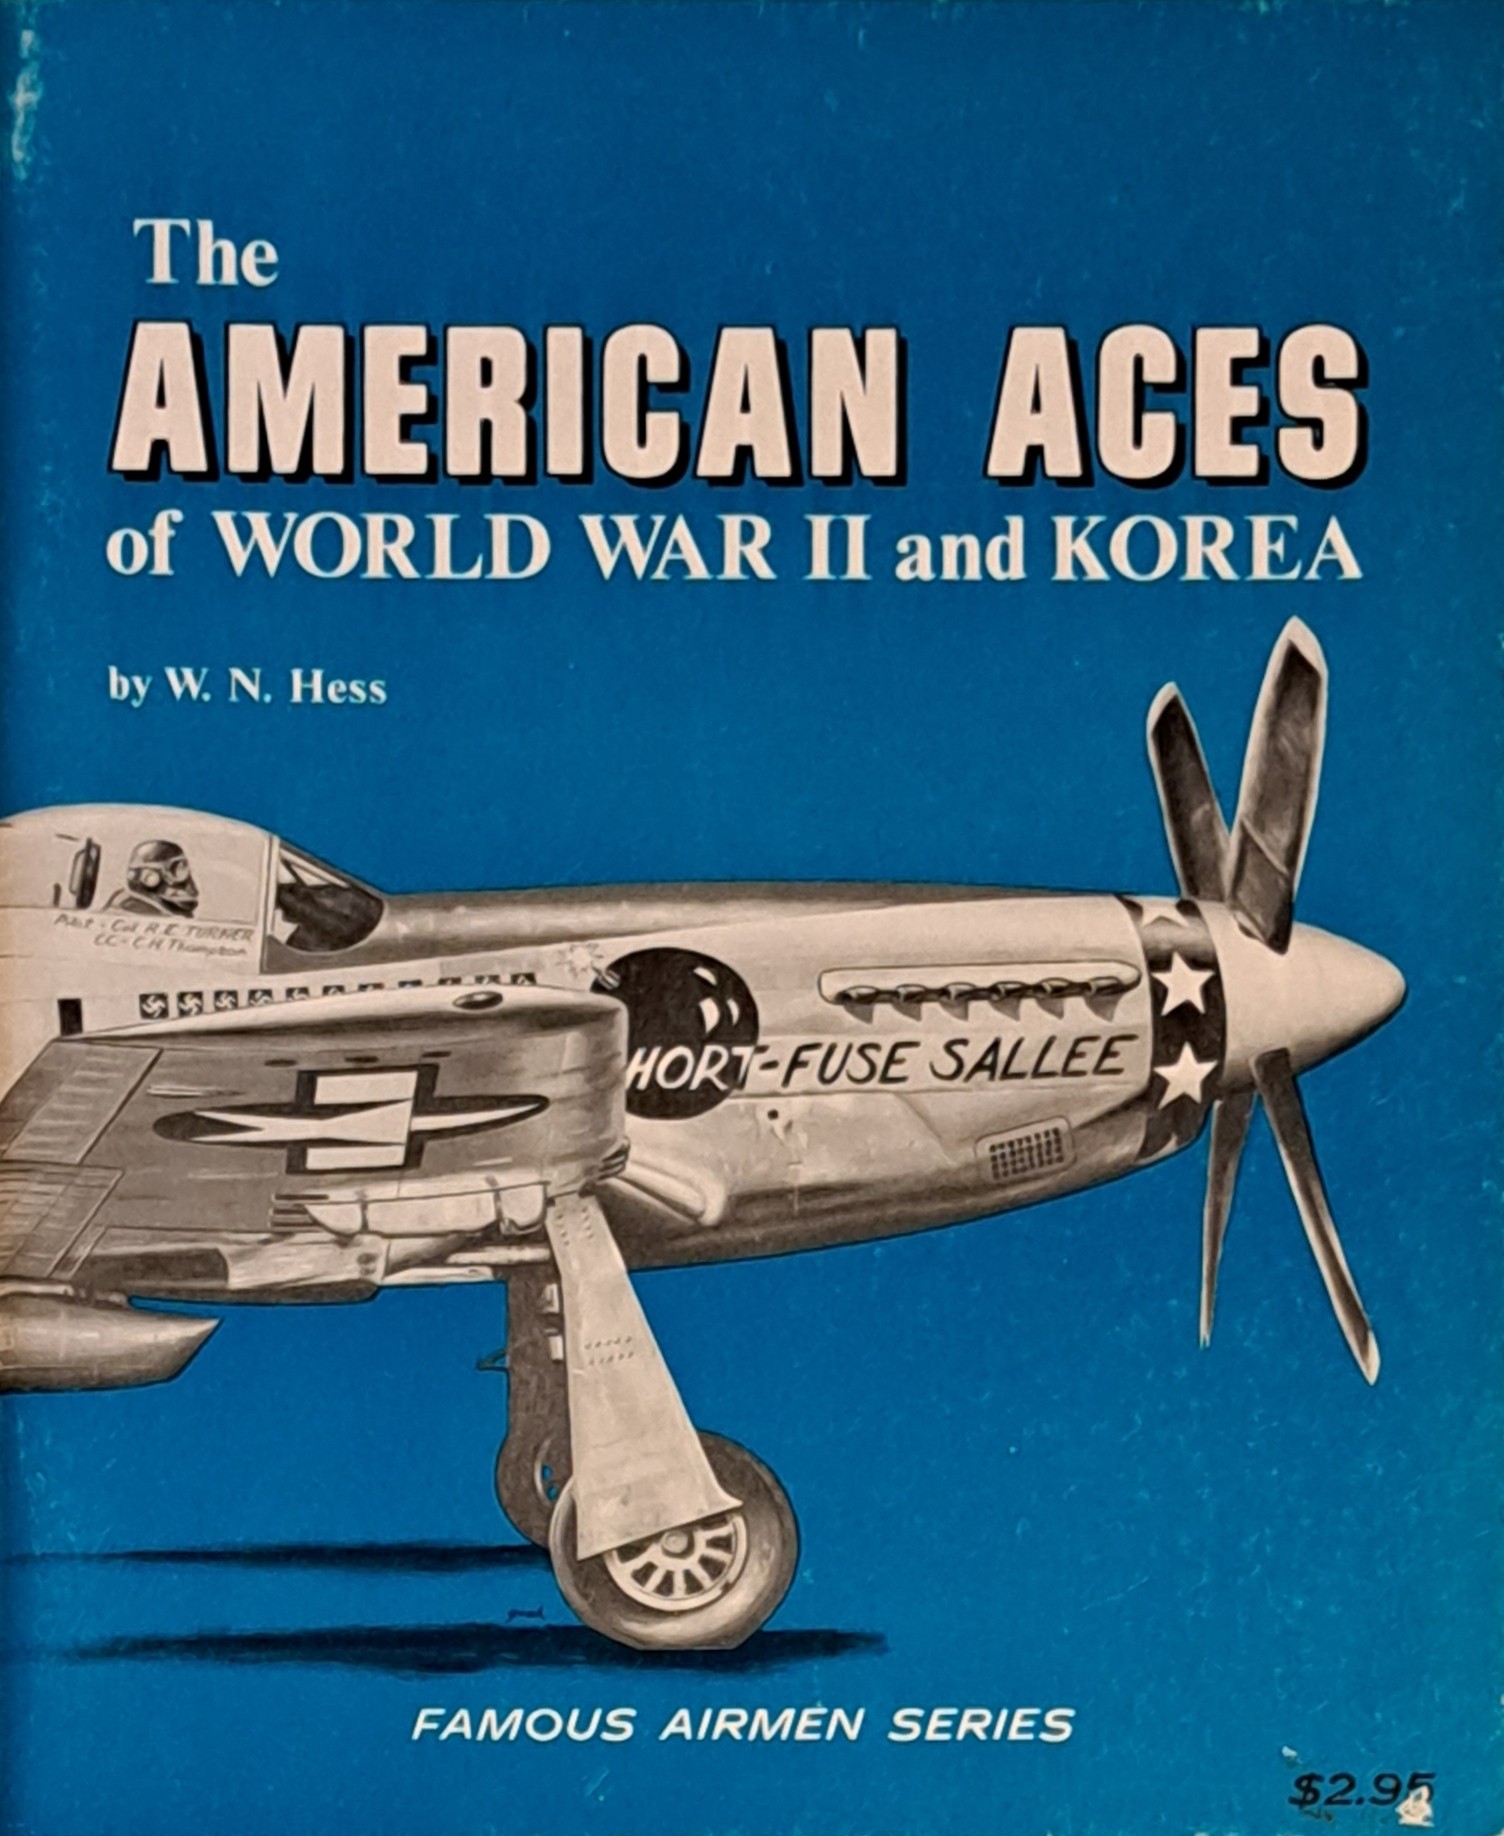 American Aces of WWII and Korea (Famous airmen series)